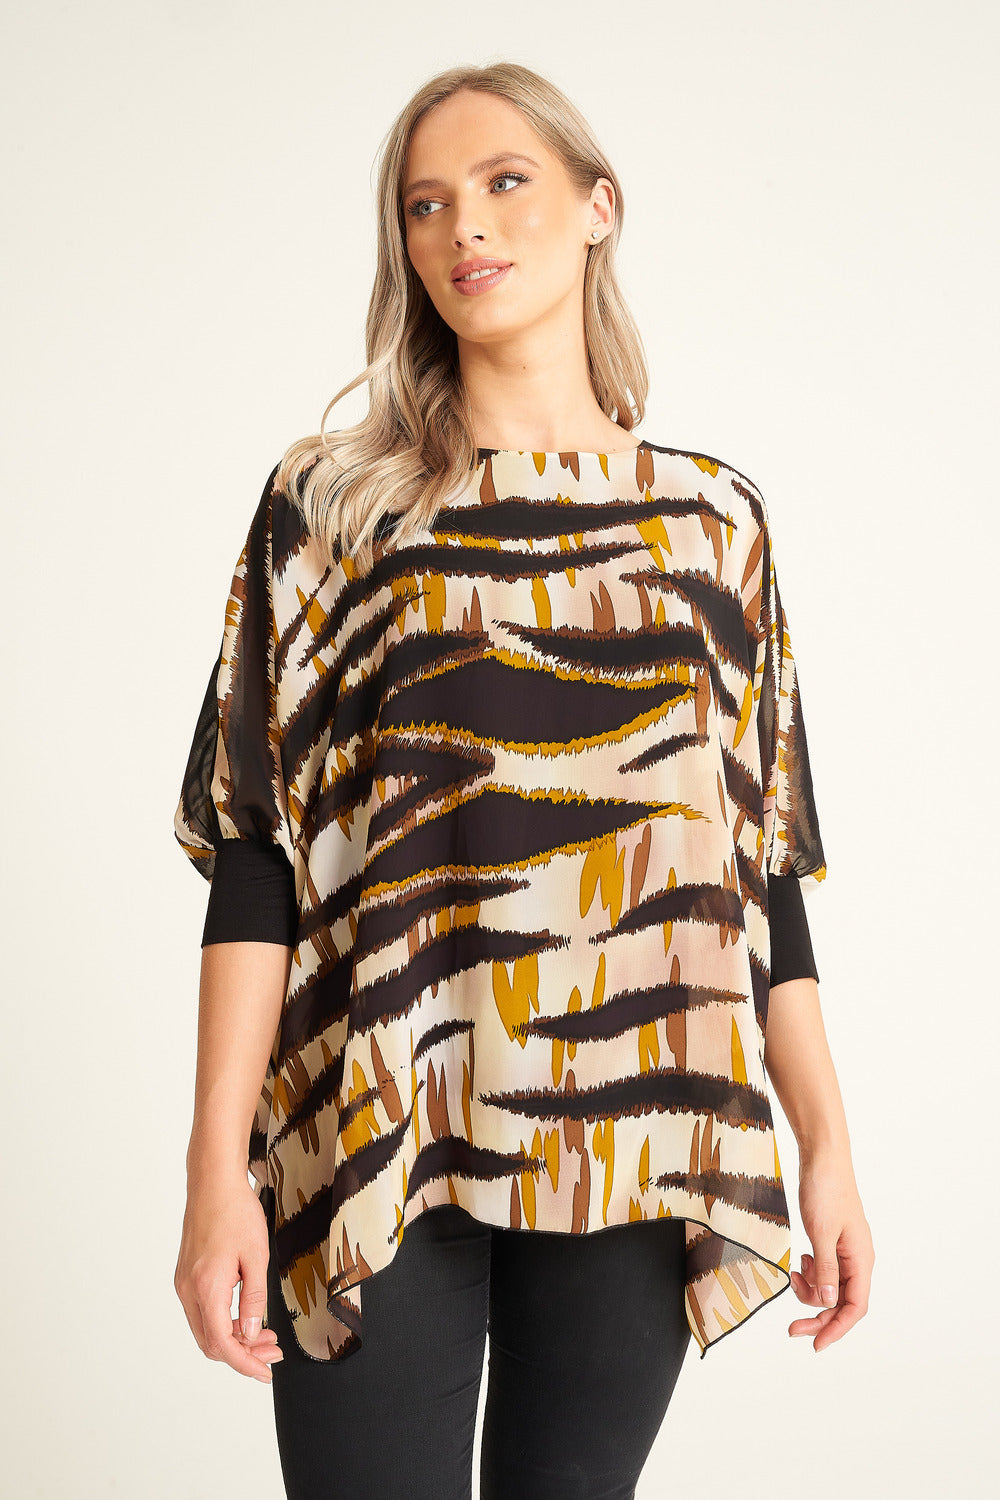 Saloos Animal-Printed Chiffon Top with Necklace